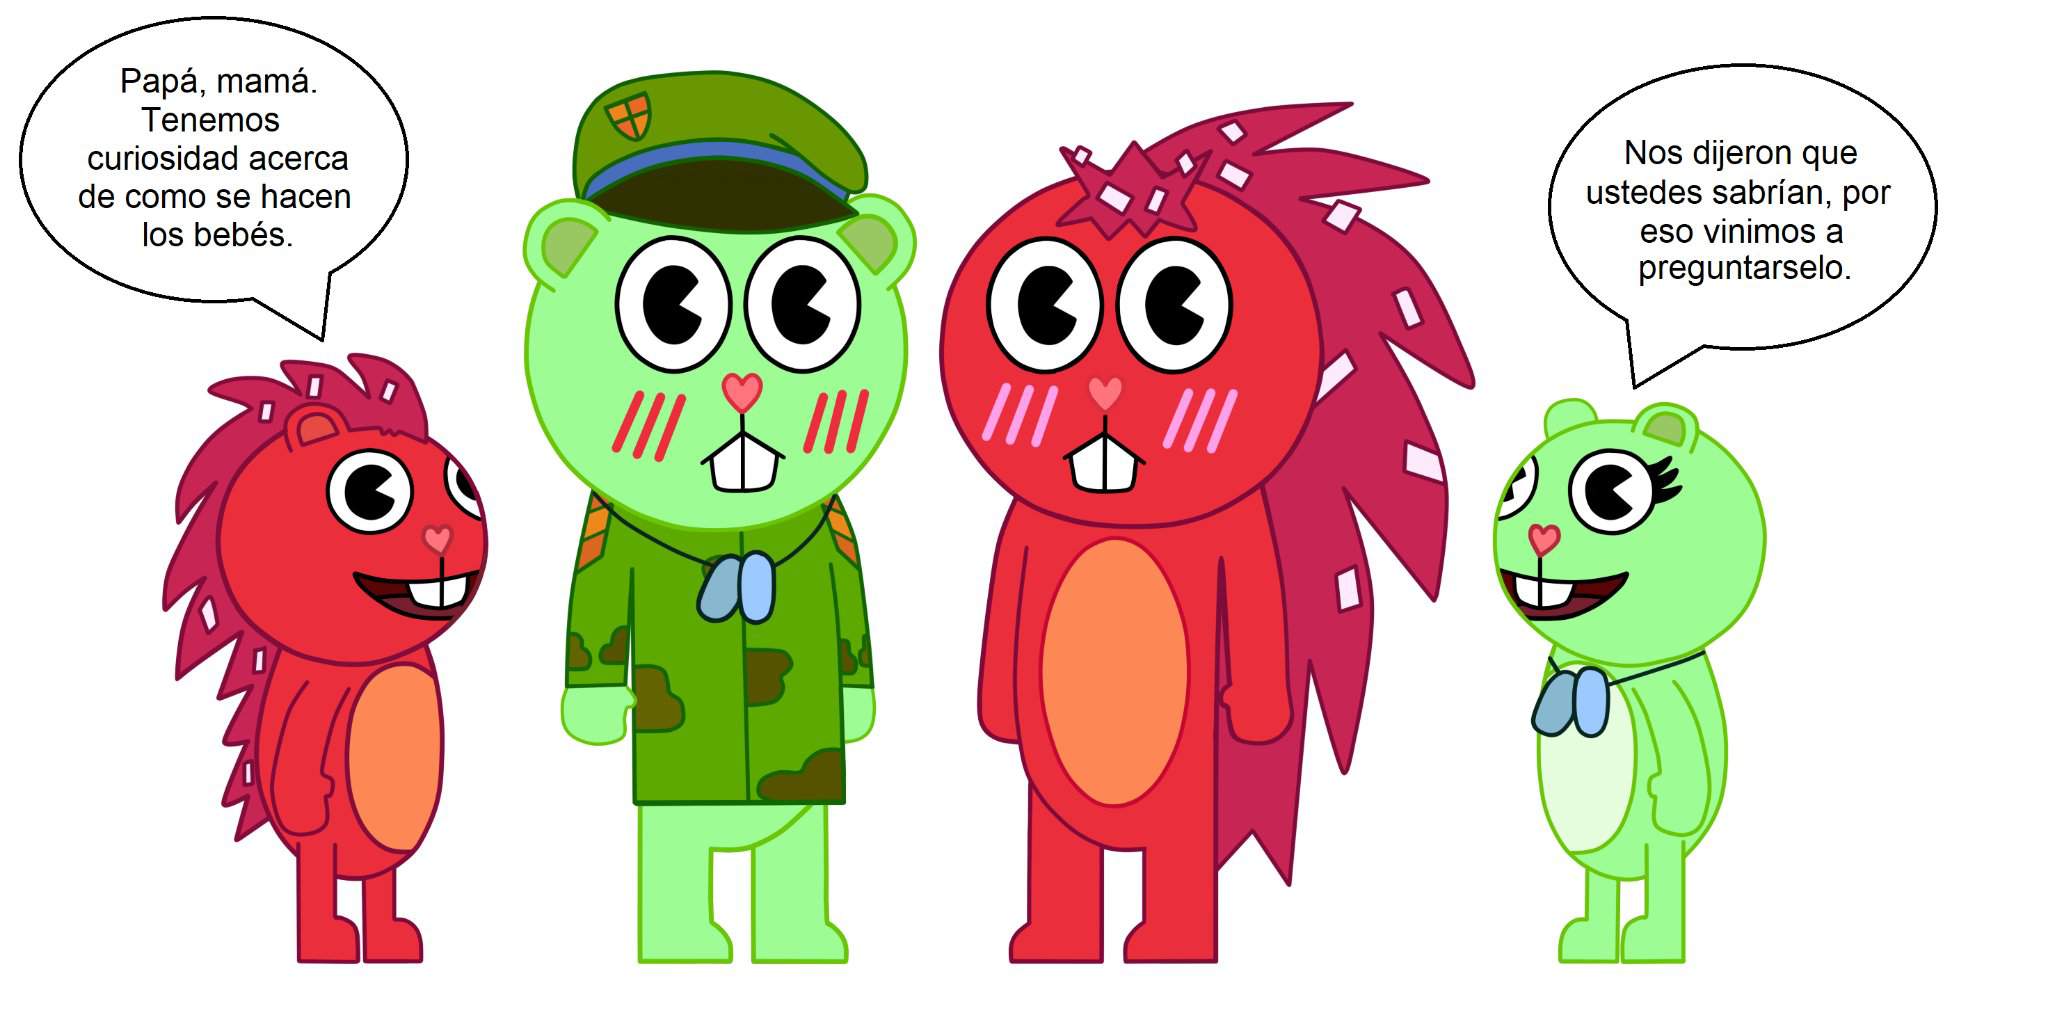 How old is flaky from happy tree friends